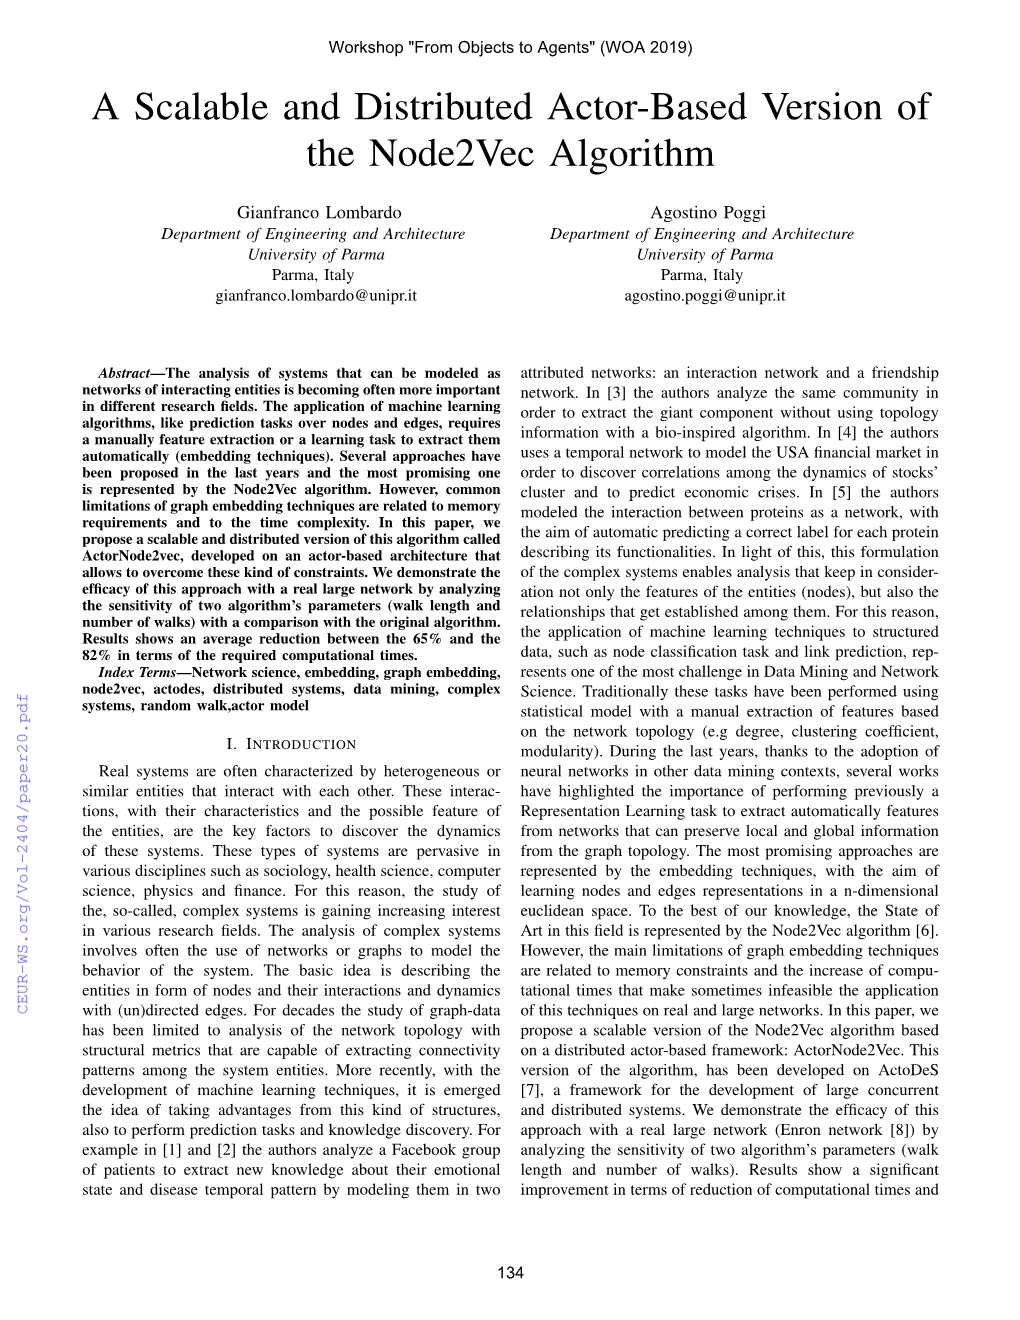 A Scalable and Distributed Actor-Based Version of the Node2vec Algorithm